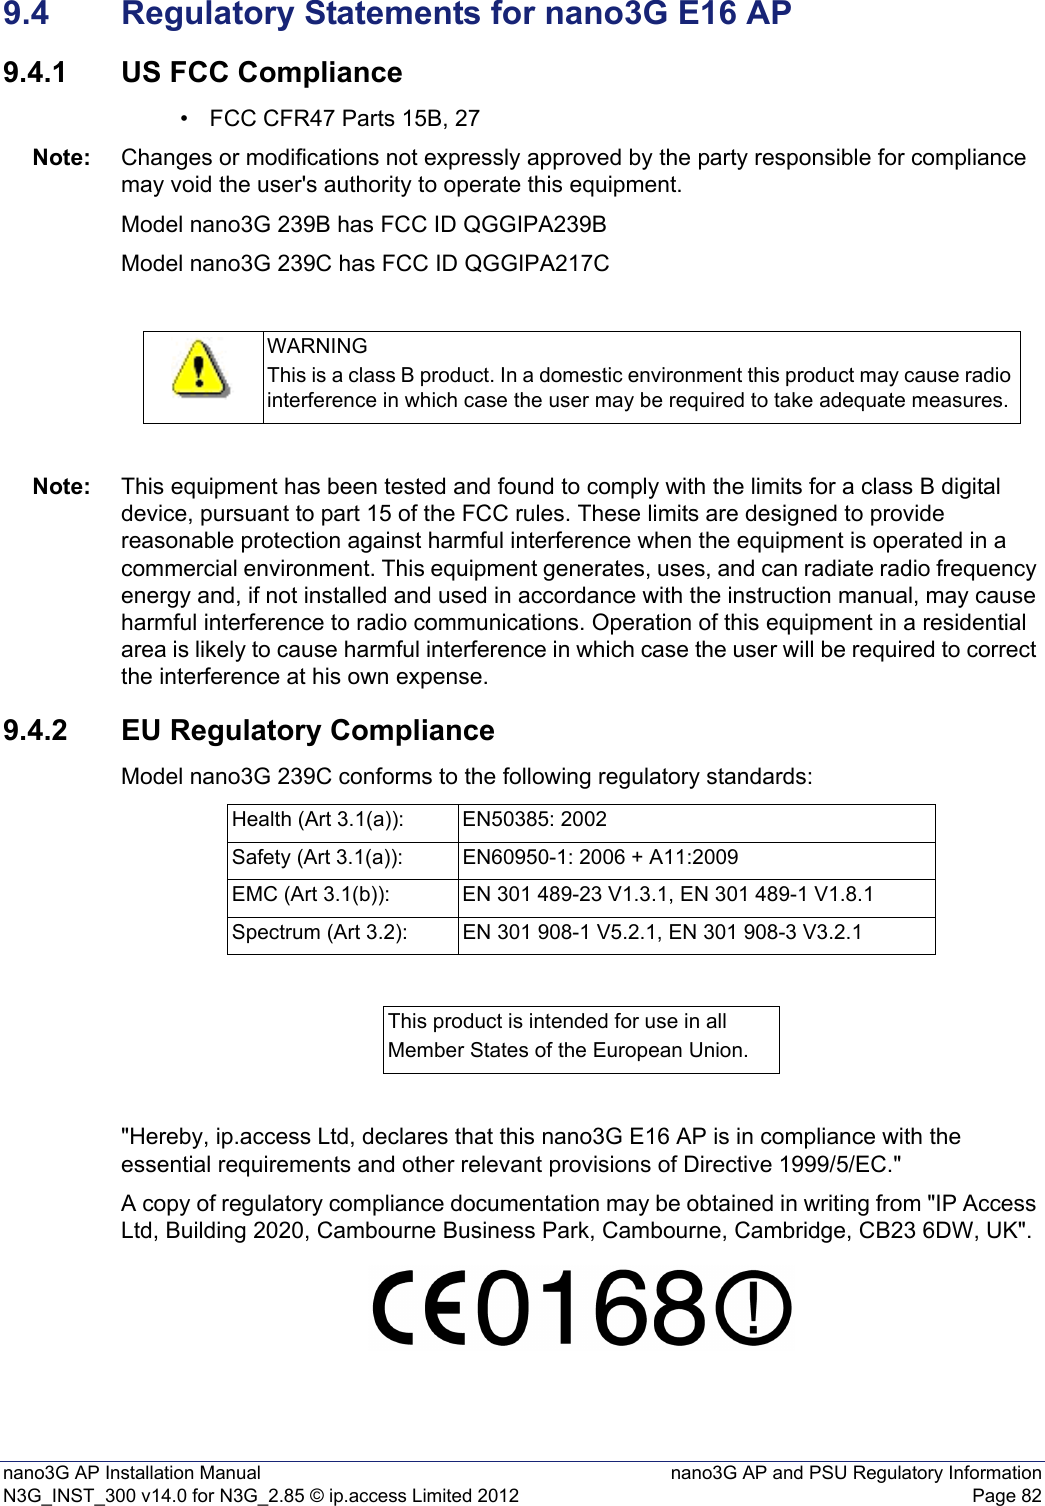 nano3G AP Installation Manual nano3G AP and PSU Regulatory InformationN3G_INST_300 v14.0 for N3G_2.85 © ip.access Limited 2012 Page 829.4 Regulatory Statements for nano3G E16 AP9.4.1 US FCC Compliance• FCC CFR47 Parts 15B, 27Note: Changes or modifications not expressly approved by the party responsible for compliance may void the user&apos;s authority to operate this equipment.Model nano3G 239B has FCC ID QGGIPA239BModel nano3G 239C has FCC ID QGGIPA217CNote: This equipment has been tested and found to comply with the limits for a class B digital device, pursuant to part 15 of the FCC rules. These limits are designed to provide reasonable protection against harmful interference when the equipment is operated in a commercial environment. This equipment generates, uses, and can radiate radio frequency energy and, if not installed and used in accordance with the instruction manual, may cause harmful interference to radio communications. Operation of this equipment in a residential area is likely to cause harmful interference in which case the user will be required to correct the interference at his own expense.9.4.2 EU Regulatory ComplianceModel nano3G 239C conforms to the following regulatory standards:&quot;Hereby, ip.access Ltd, declares that this nano3G E16 AP is in compliance with the essential requirements and other relevant provisions of Directive 1999/5/EC.&quot;A copy of regulatory compliance documentation may be obtained in writing from &quot;IP Access Ltd, Building 2020, Cambourne Business Park, Cambourne, Cambridge, CB23 6DW, UK&quot;.WARNINGThis is a class B product. In a domestic environment this product may cause radio interference in which case the user may be required to take adequate measures.Health (Art 3.1(a)): EN50385: 2002Safety (Art 3.1(a)): EN60950-1: 2006 + A11:2009EMC (Art 3.1(b)): EN 301 489-23 V1.3.1, EN 301 489-1 V1.8.1Spectrum (Art 3.2): EN 301 908-1 V5.2.1, EN 301 908-3 V3.2.1This product is intended for use in allMember States of the European Union.